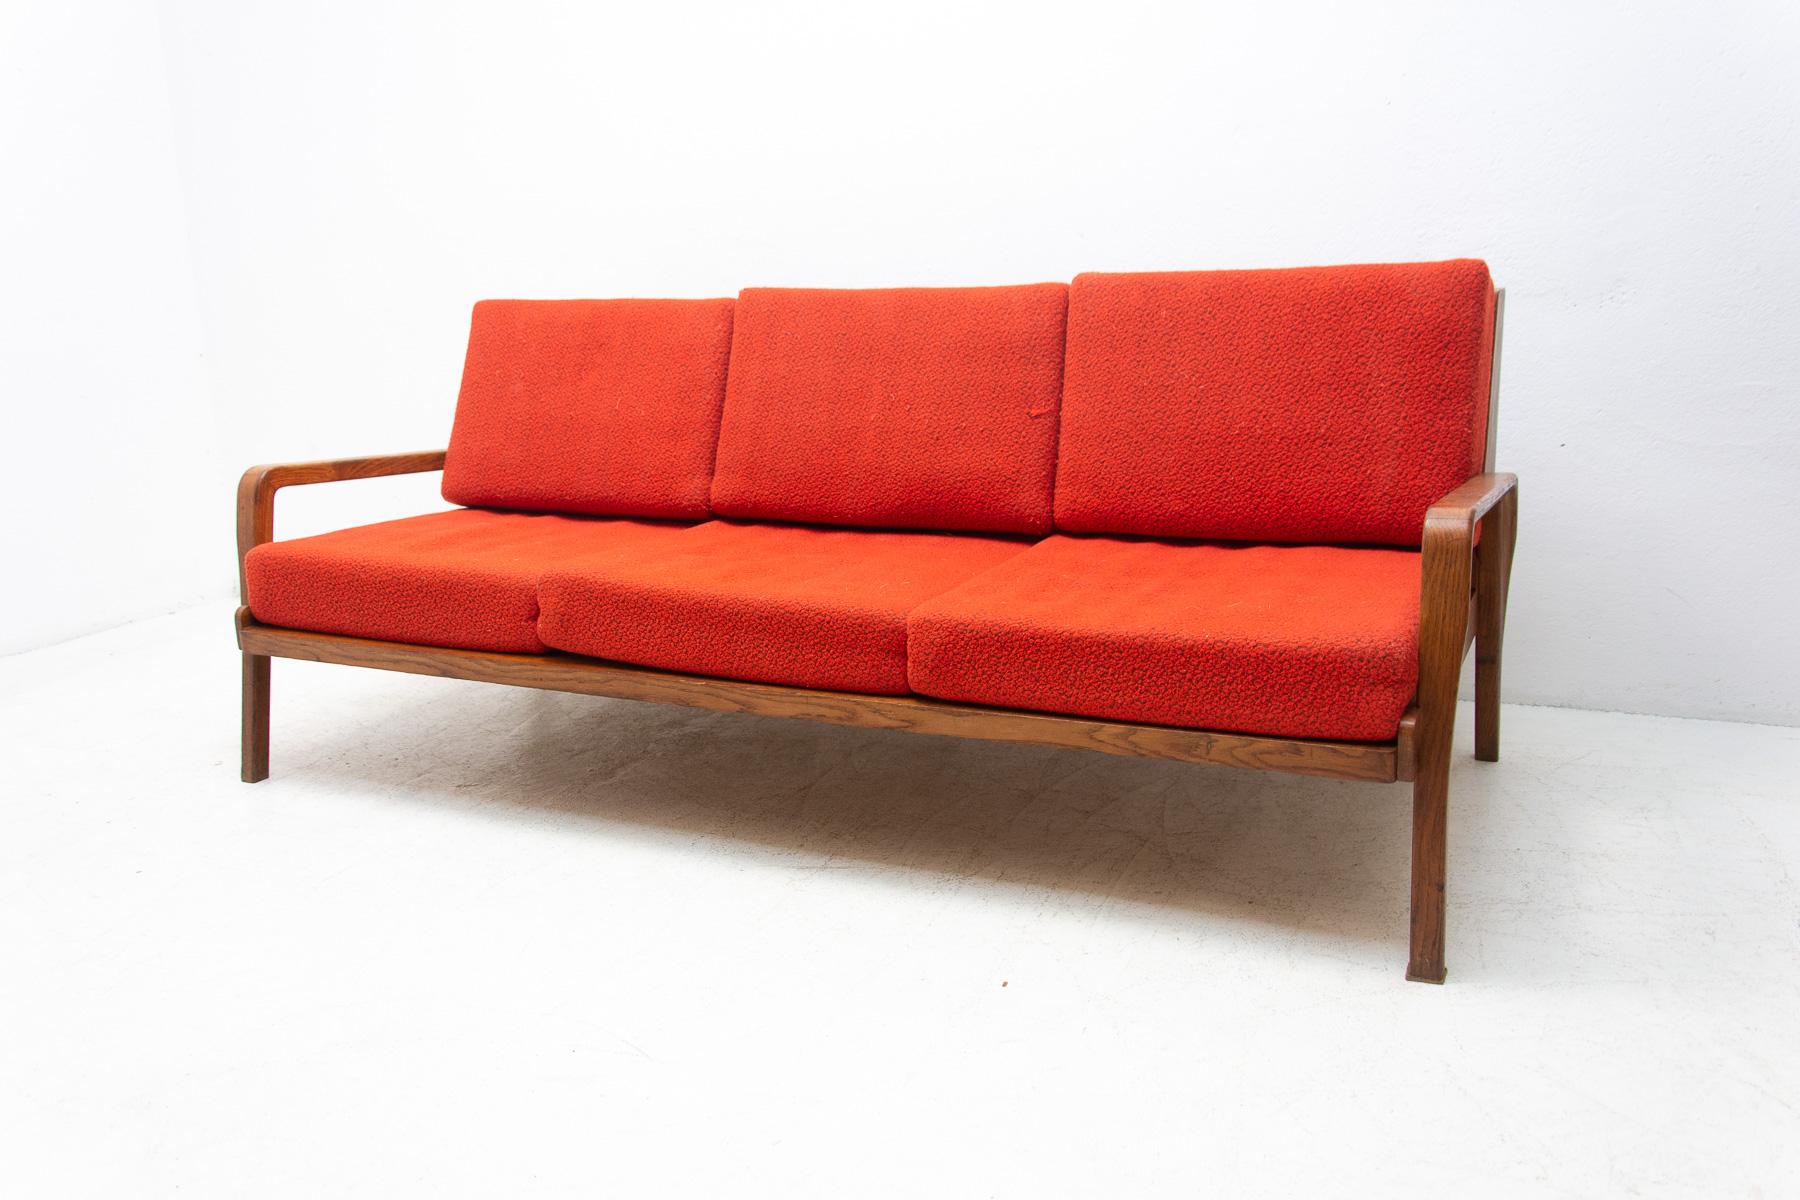 Mid century sofa in Scandinavian style. It was made in the former Czechoslovakia in the 1960´s. This sofa features wooden structure made of beech wood. The sofa is in good Vintage condition, showing signs of age and using.

 

Measures: Lenght: